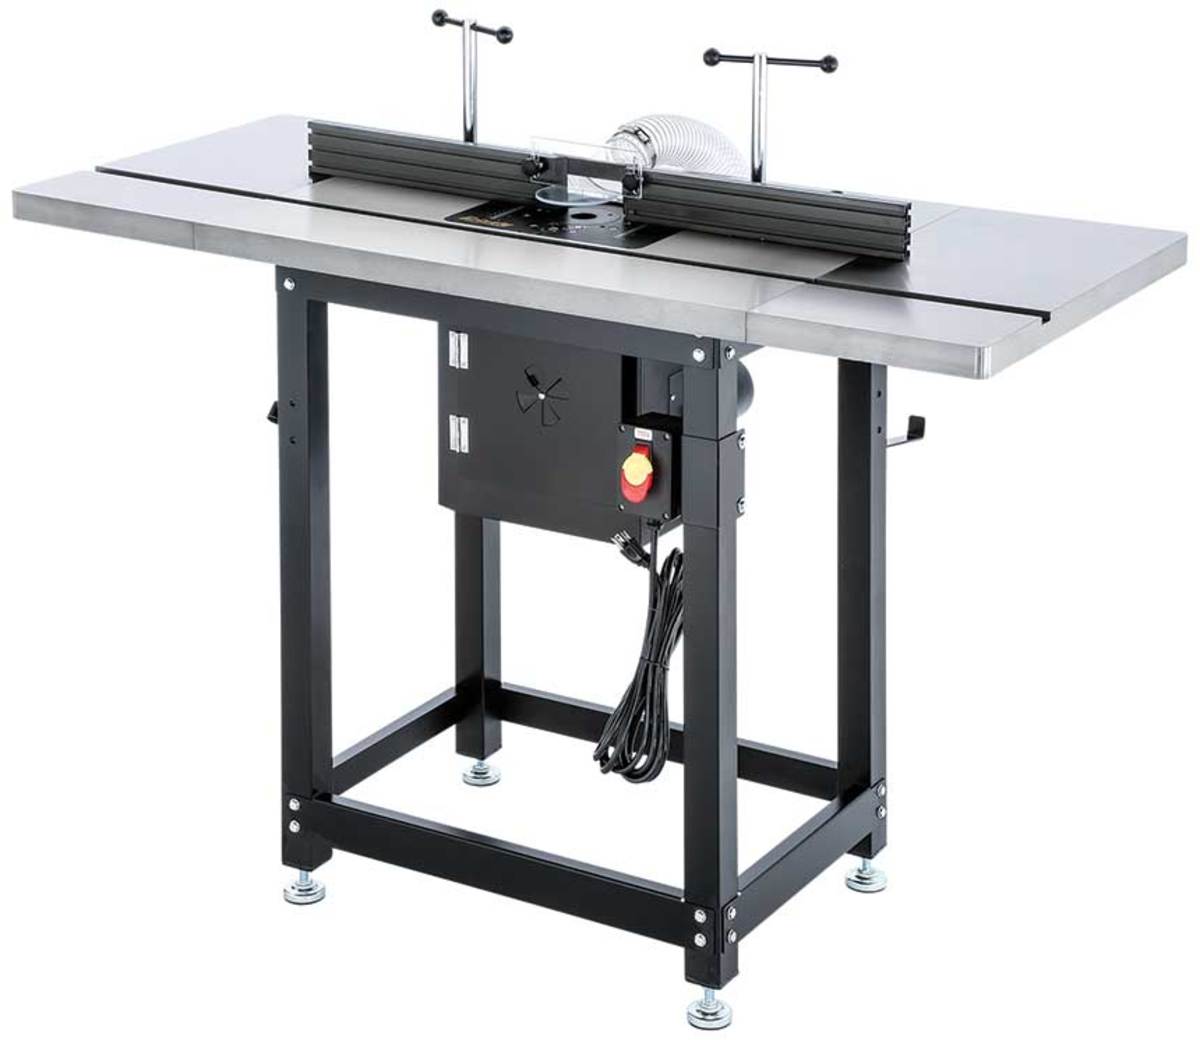 Grizzly-router-table-2